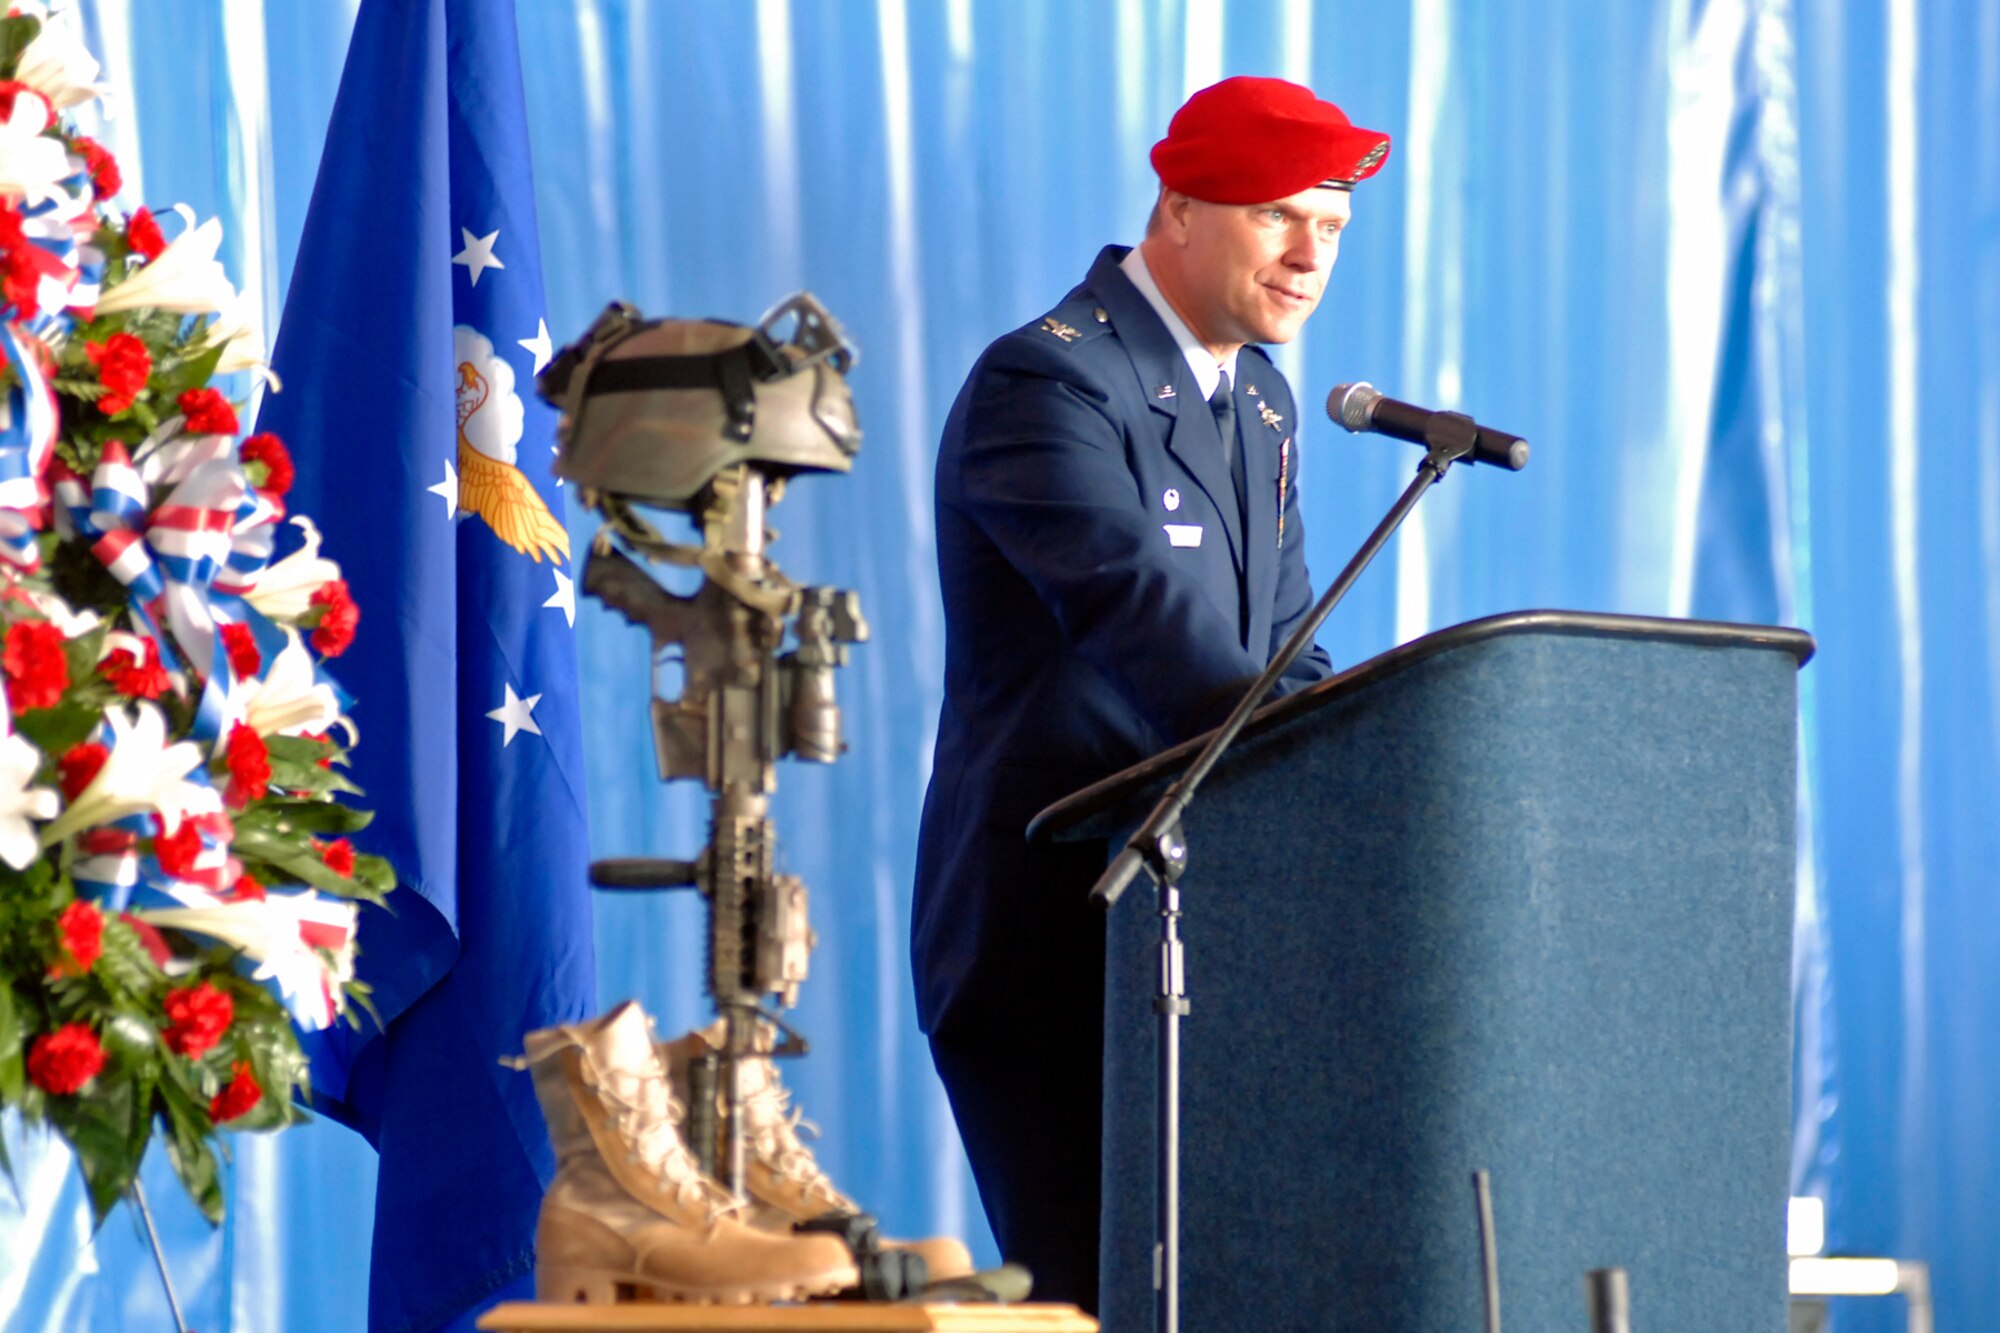 Col. Marc Stratton, 720th Special Tactics Group Commander, speaks during the memorial ceremony for Tech. Sgt. William Jefferson Jr., 21st Special Tactics Squadron, at Hangar 4 on Pope Air Force Base March 26. Sergeant Jefferson died in support of Operation Enduring Freedom March 22. (U.S. Air Force Photo by Mike Murchison)